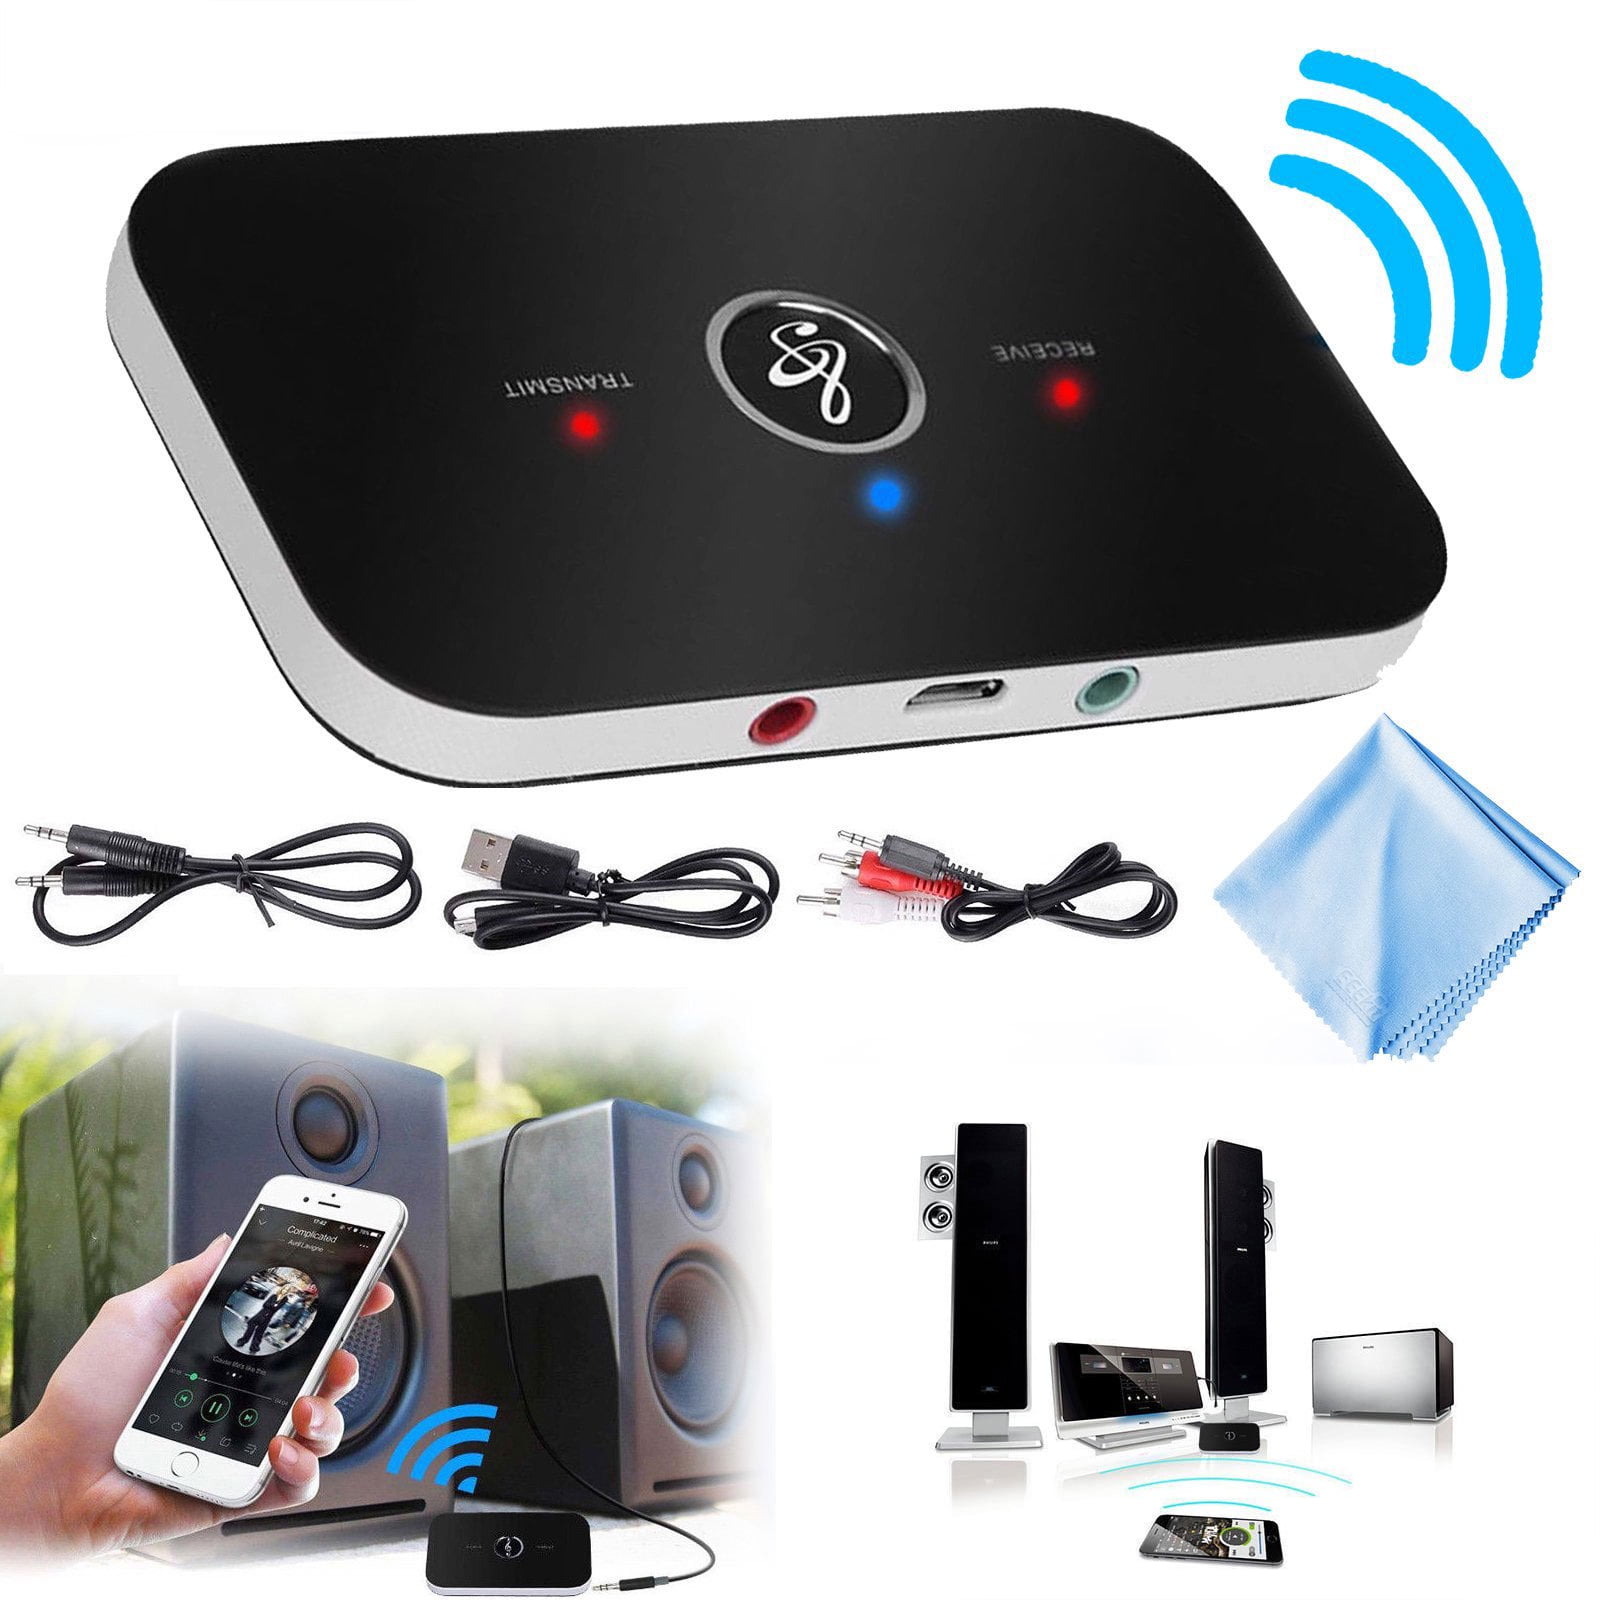 Bluetooth Transmitter Receiver Stereo Audio Music Adapter For TV PC Tablet MP3 